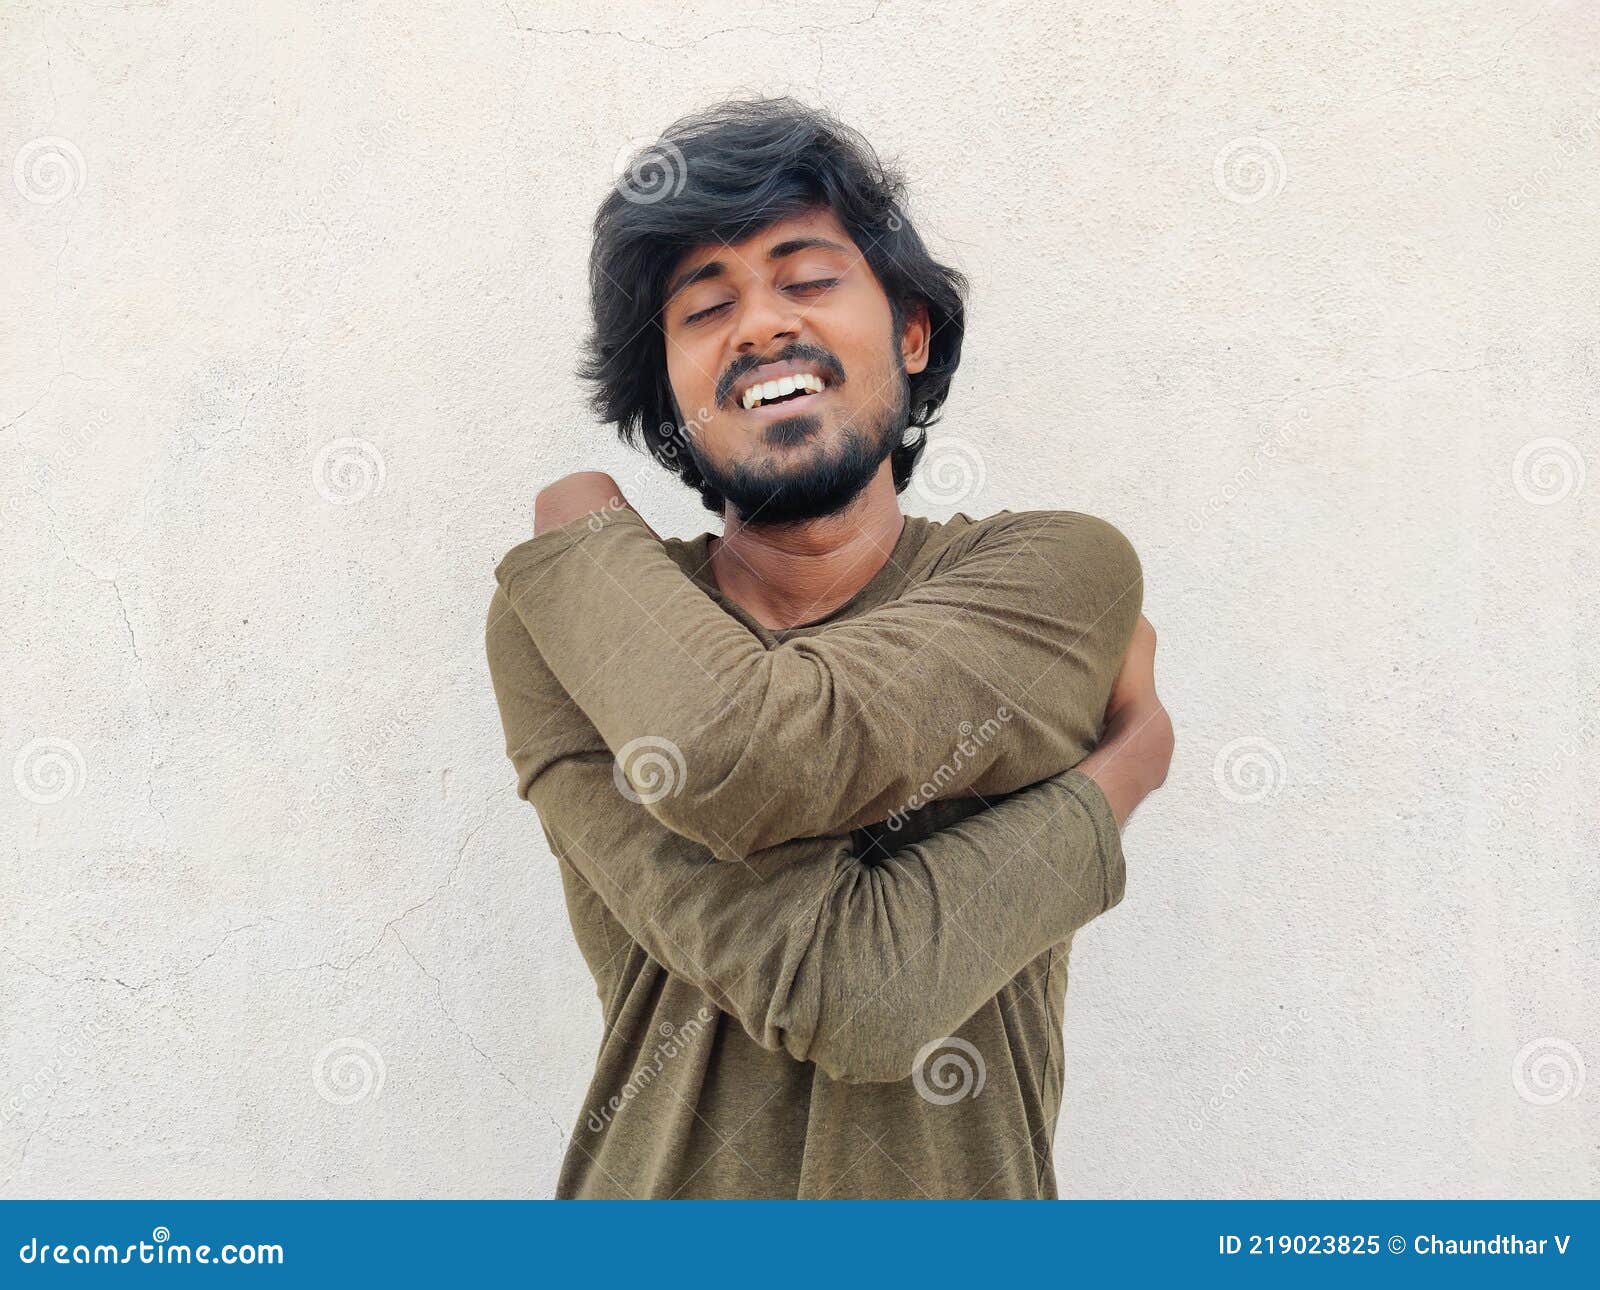 Tamil Man with Long Hairs, Beard Wearing Full Sleeves is Hugging Himself or  Oneself. Self Care Stock Image - Image of fashion, cheerful: 219023825